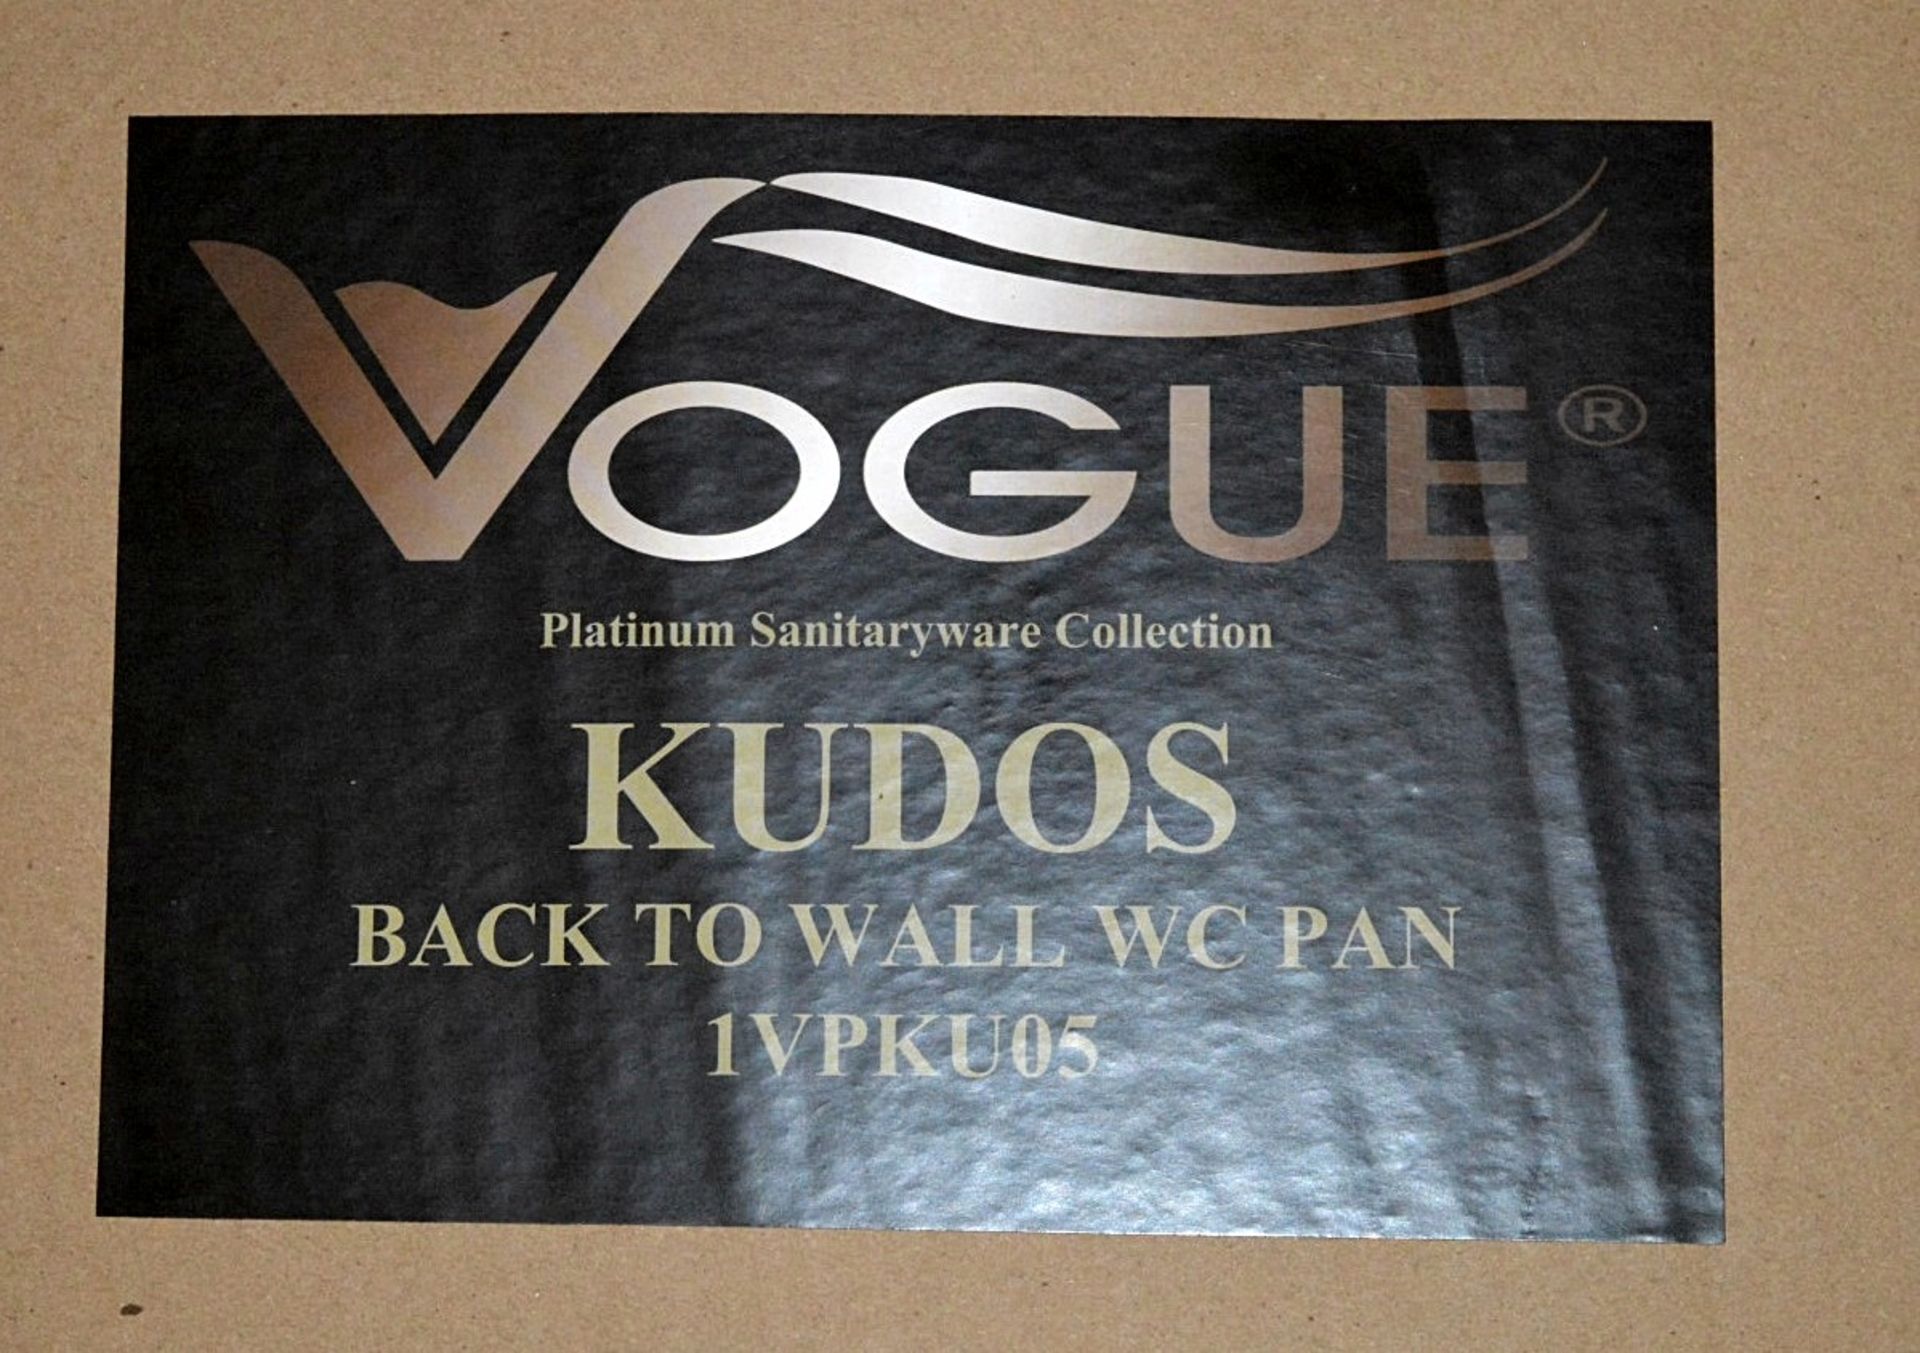 1 x Vogue Bathrooms KUDOS Back to Wall Toilet Pan - Brand New and Boxed - Seat Not Included - High - Image 2 of 2